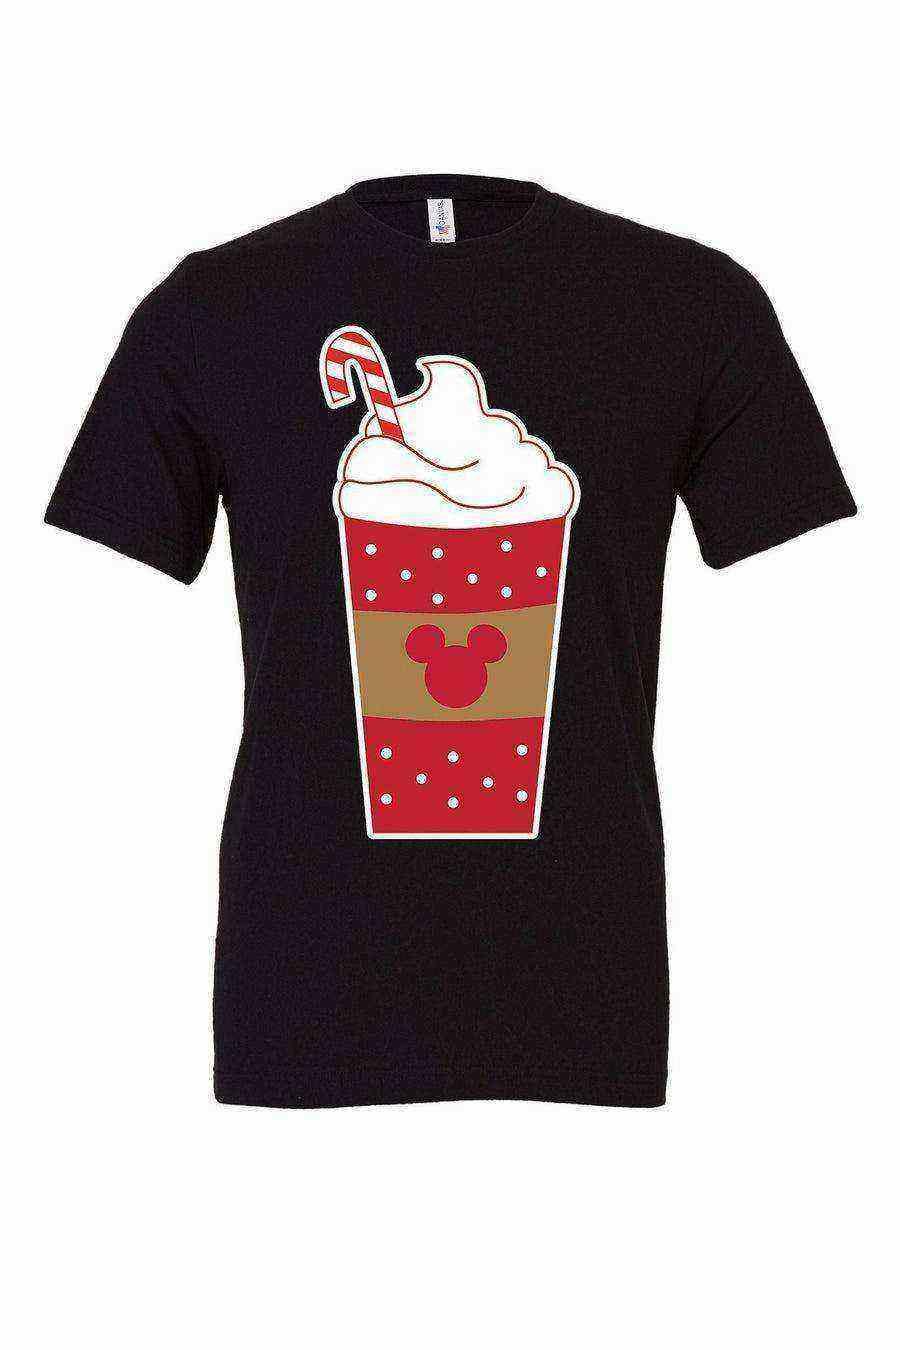 Youth | Christmas Shirt | Peppermint Mocha - Dylan's Tees